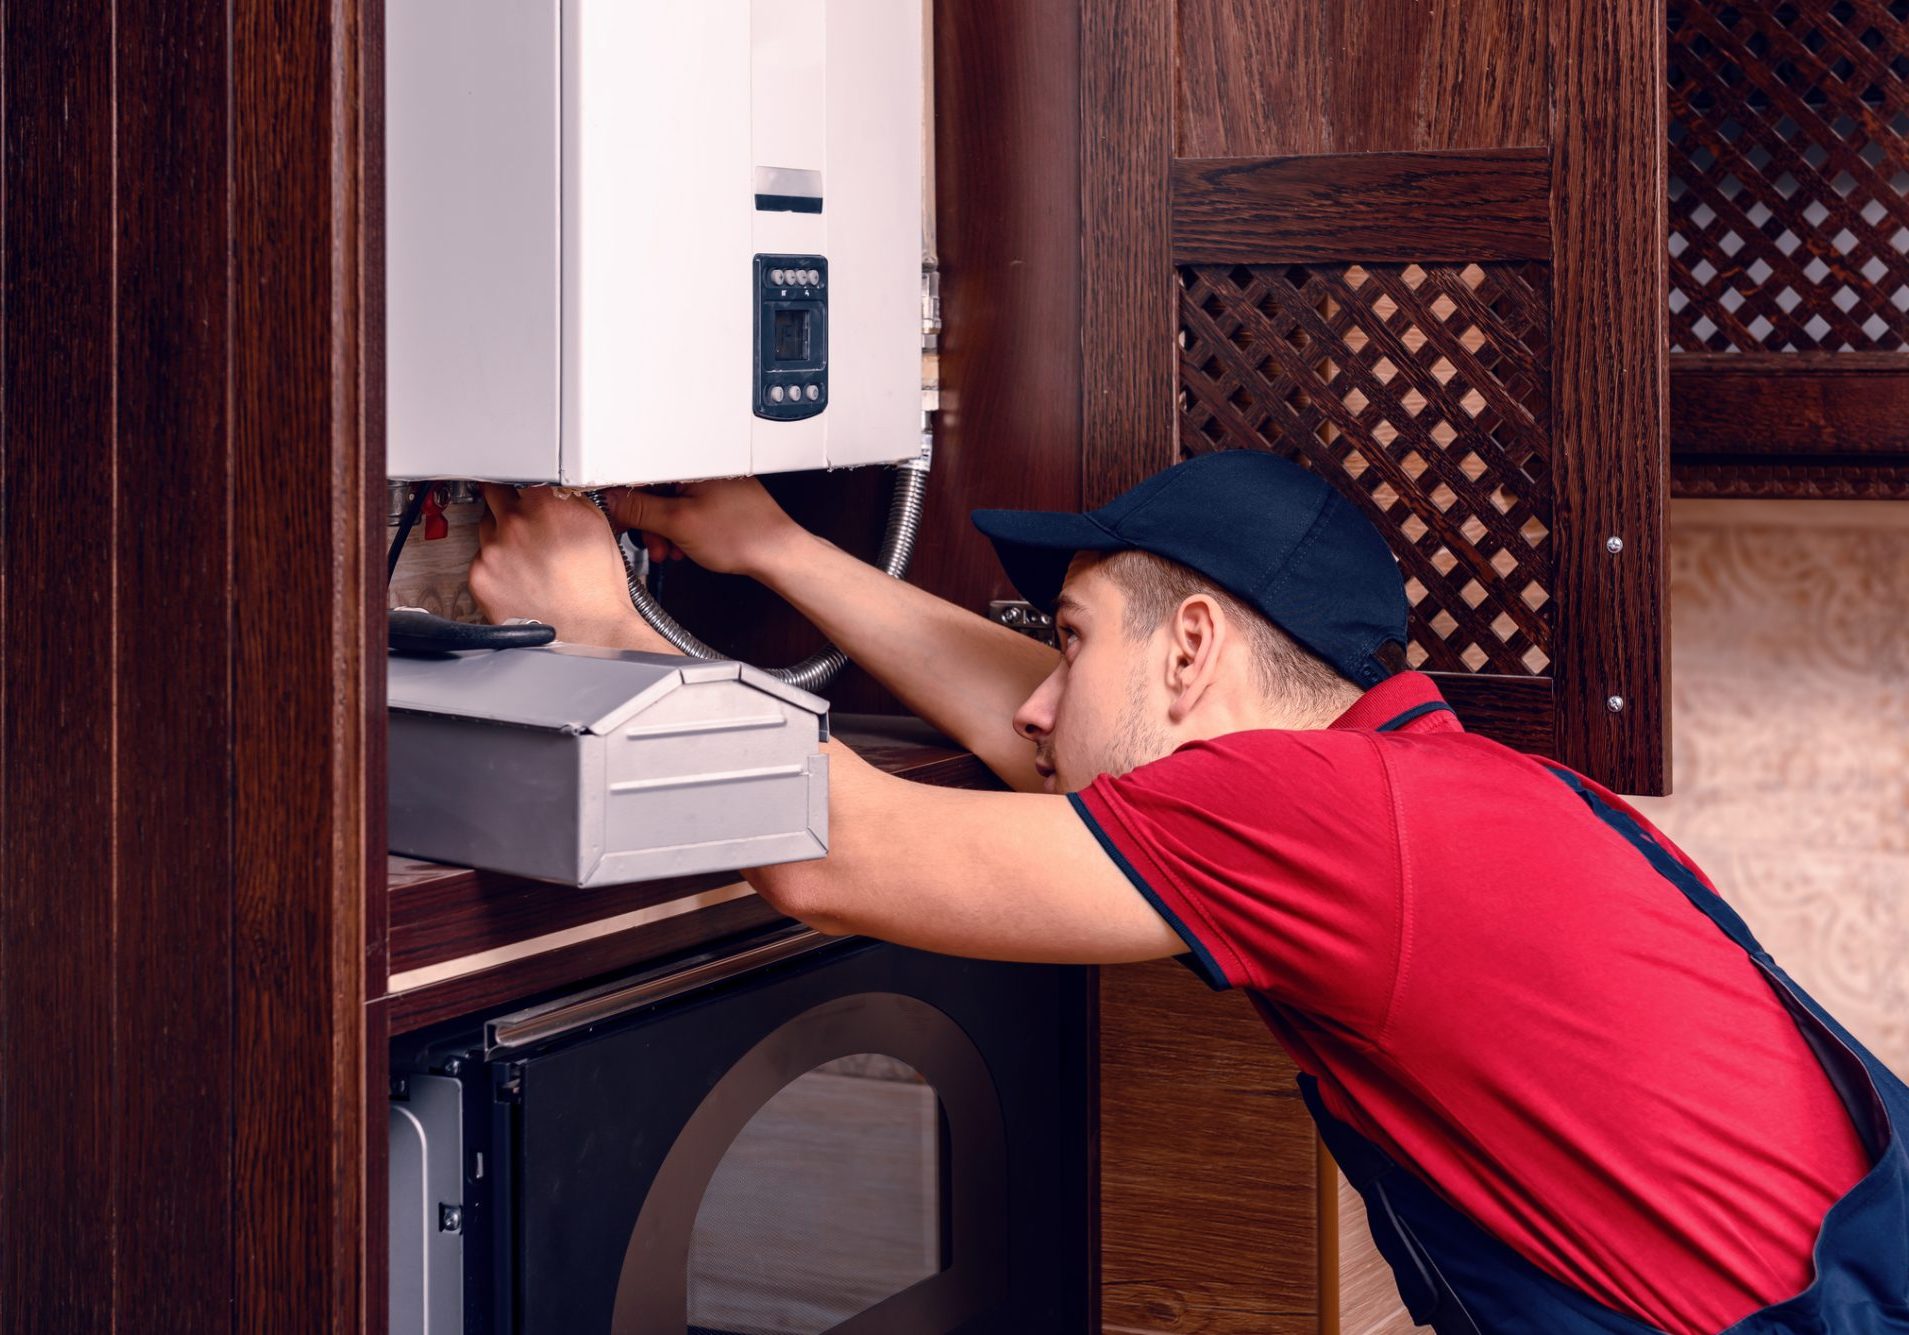 .A young skilled worker regulates the gas boiler before use